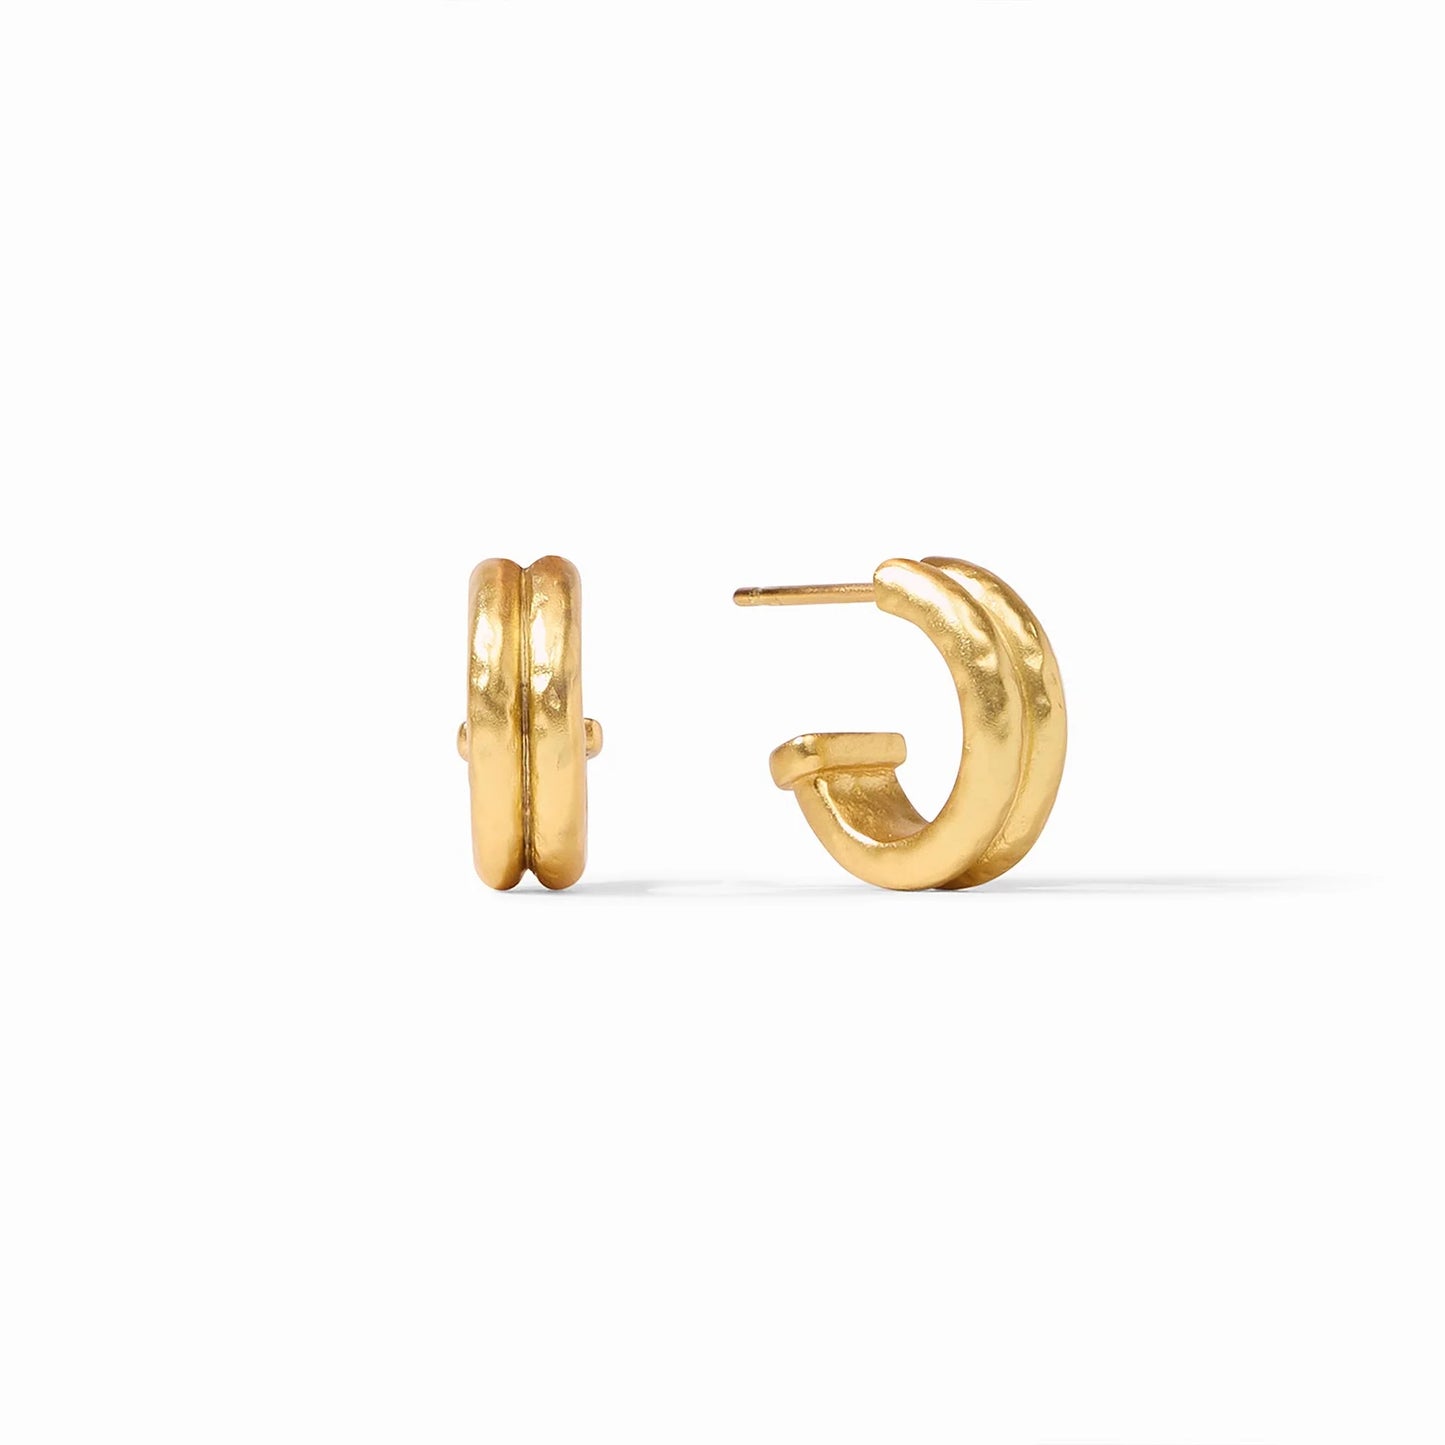 Astor Pearl Hoop & Charm Earring by Julie Vos features pumpkin-shaped freshwater pearl charm dangles from a lightly hammered huggie hoop. 24K gold plate, total length: 1.2 inches. Shop at The Painted Cottage an Annapolis boutique.